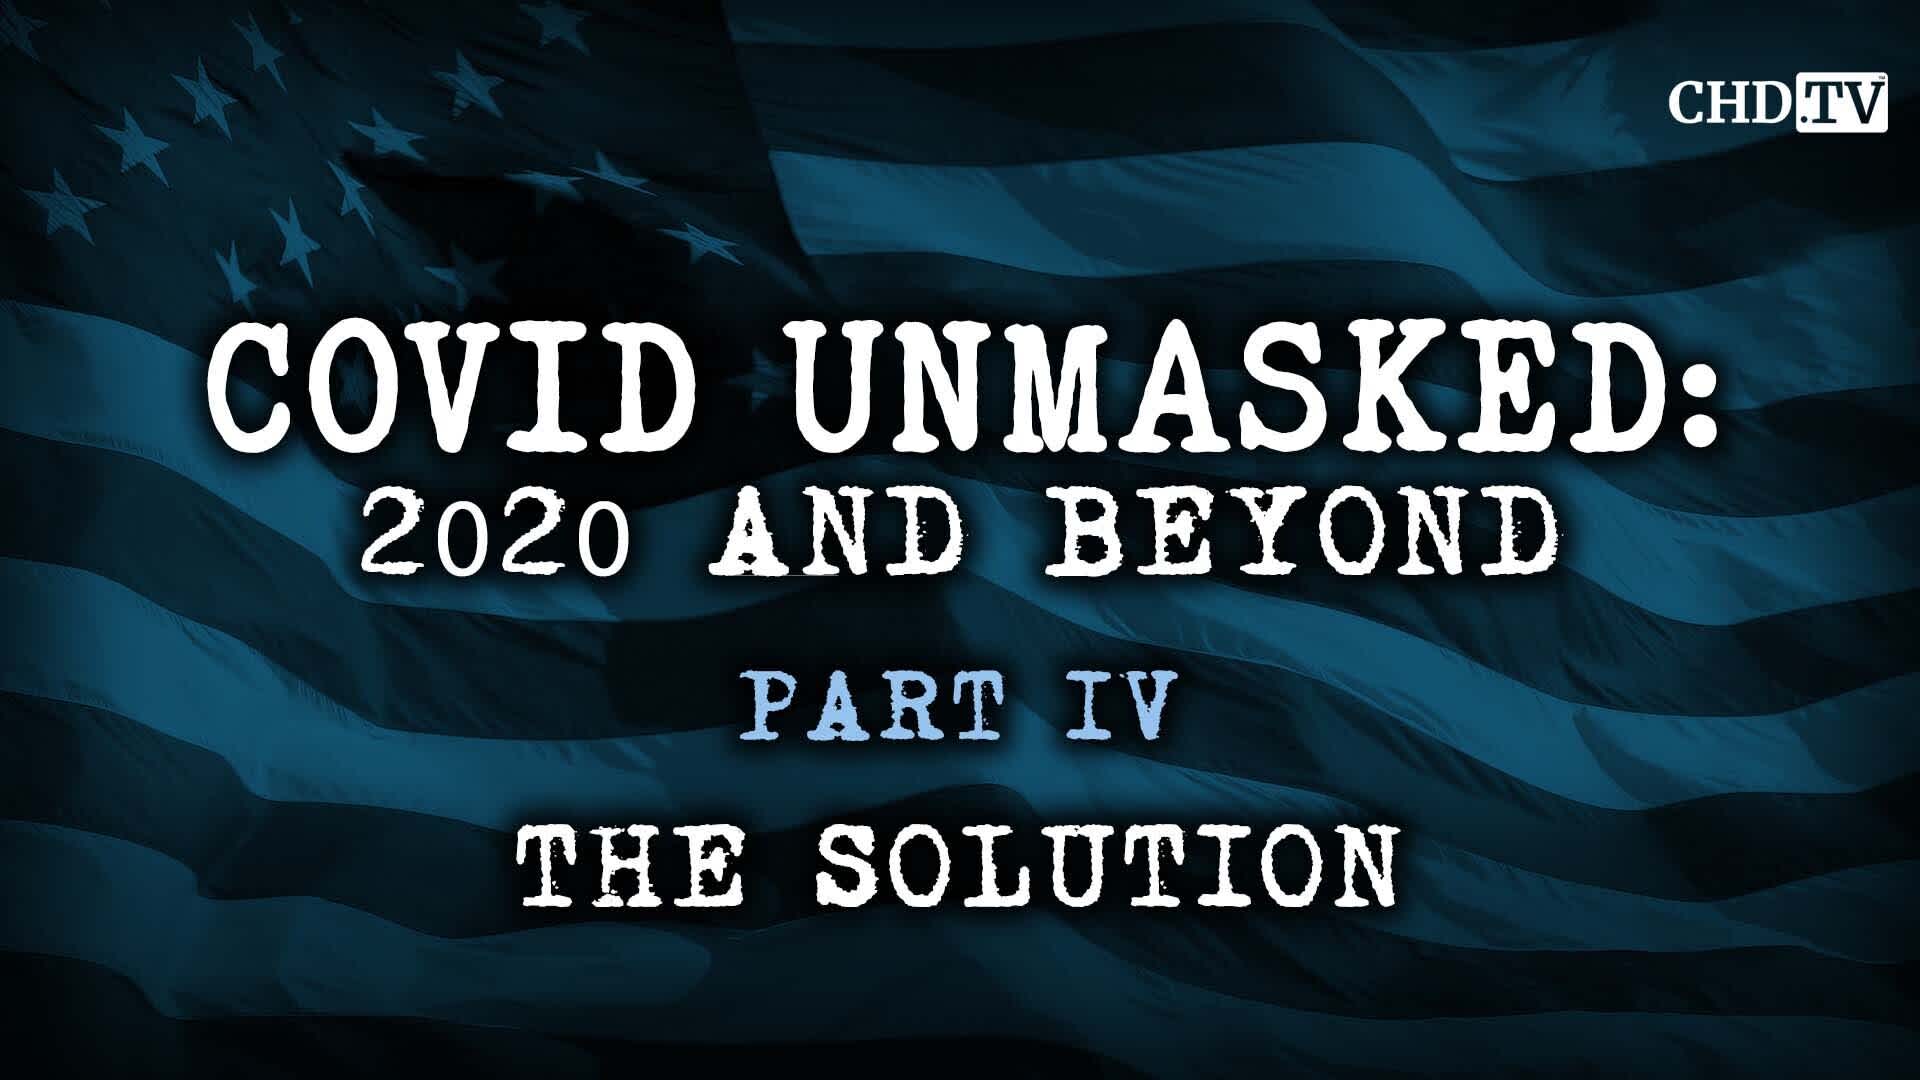 COVID UNMASKED PART 4: THE SOLUTION